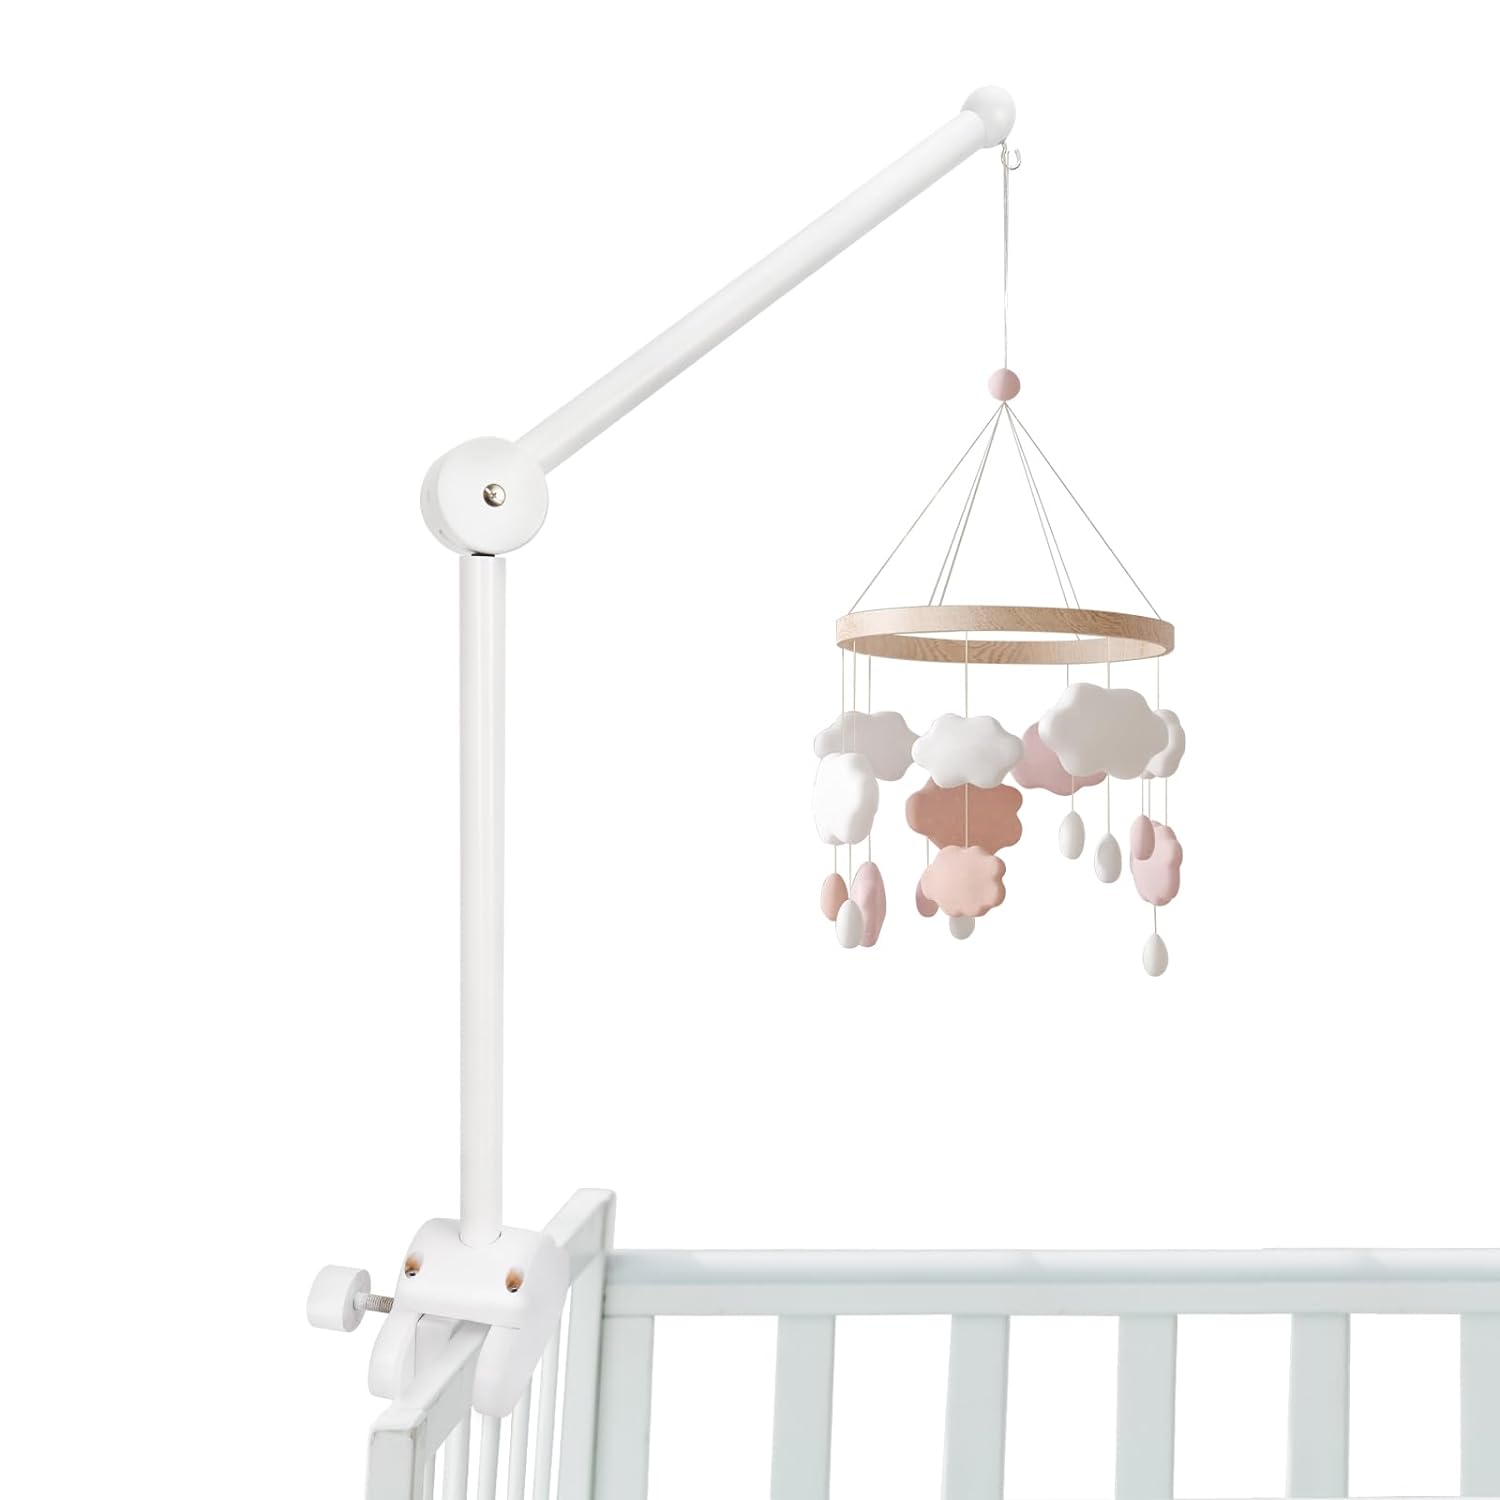 26.7Inches Wooden Baby Crib Mobile Arm Adjustable Nursery Decor Hanger Baby Bed Bell Holder for DIY Clamp Mobile Standing Toy Decoration Hanging(Excluding Hanging Rotating Bell)